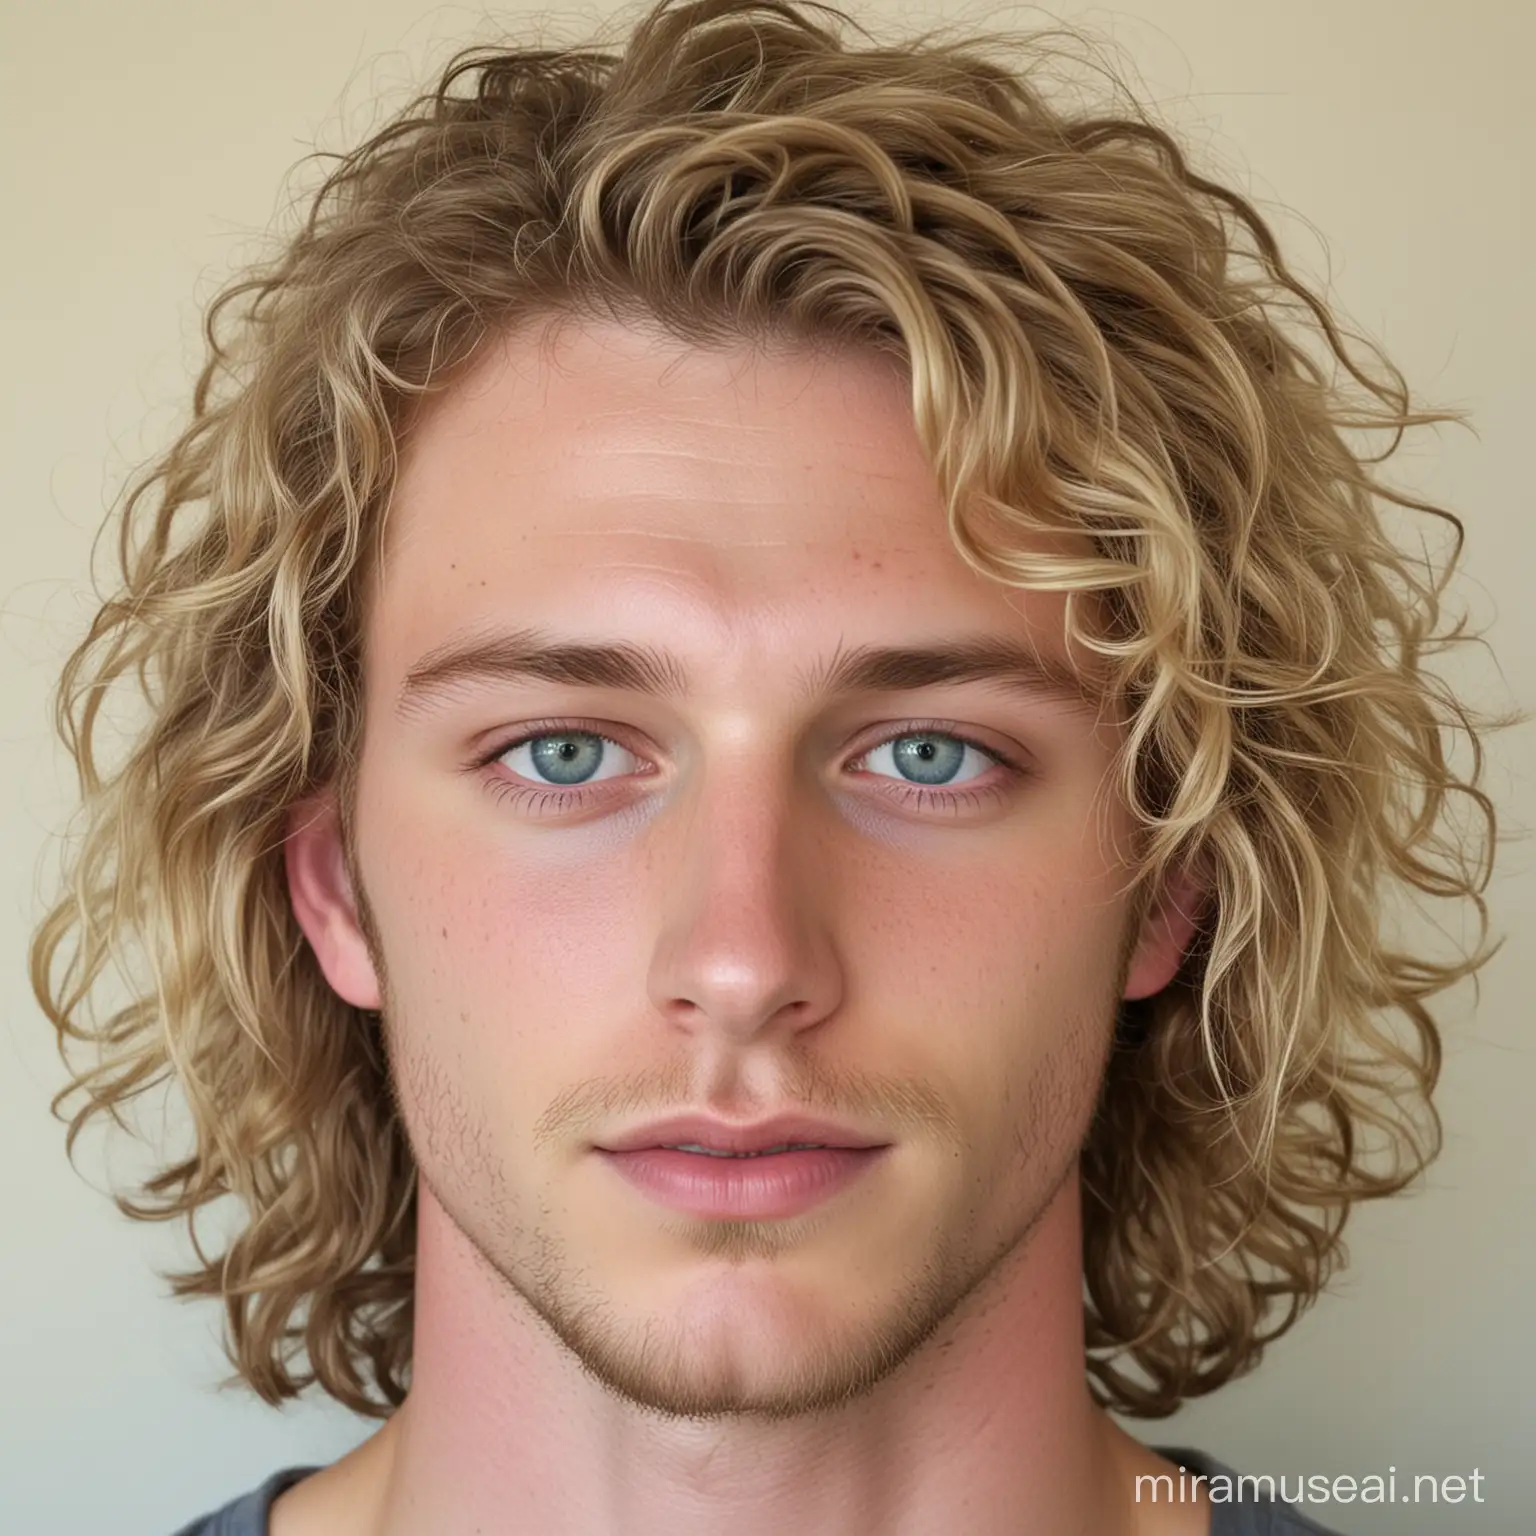 Portrait of a 25YearOld Man with Dirty Blonde Curly Hair and Light Blue Eyes